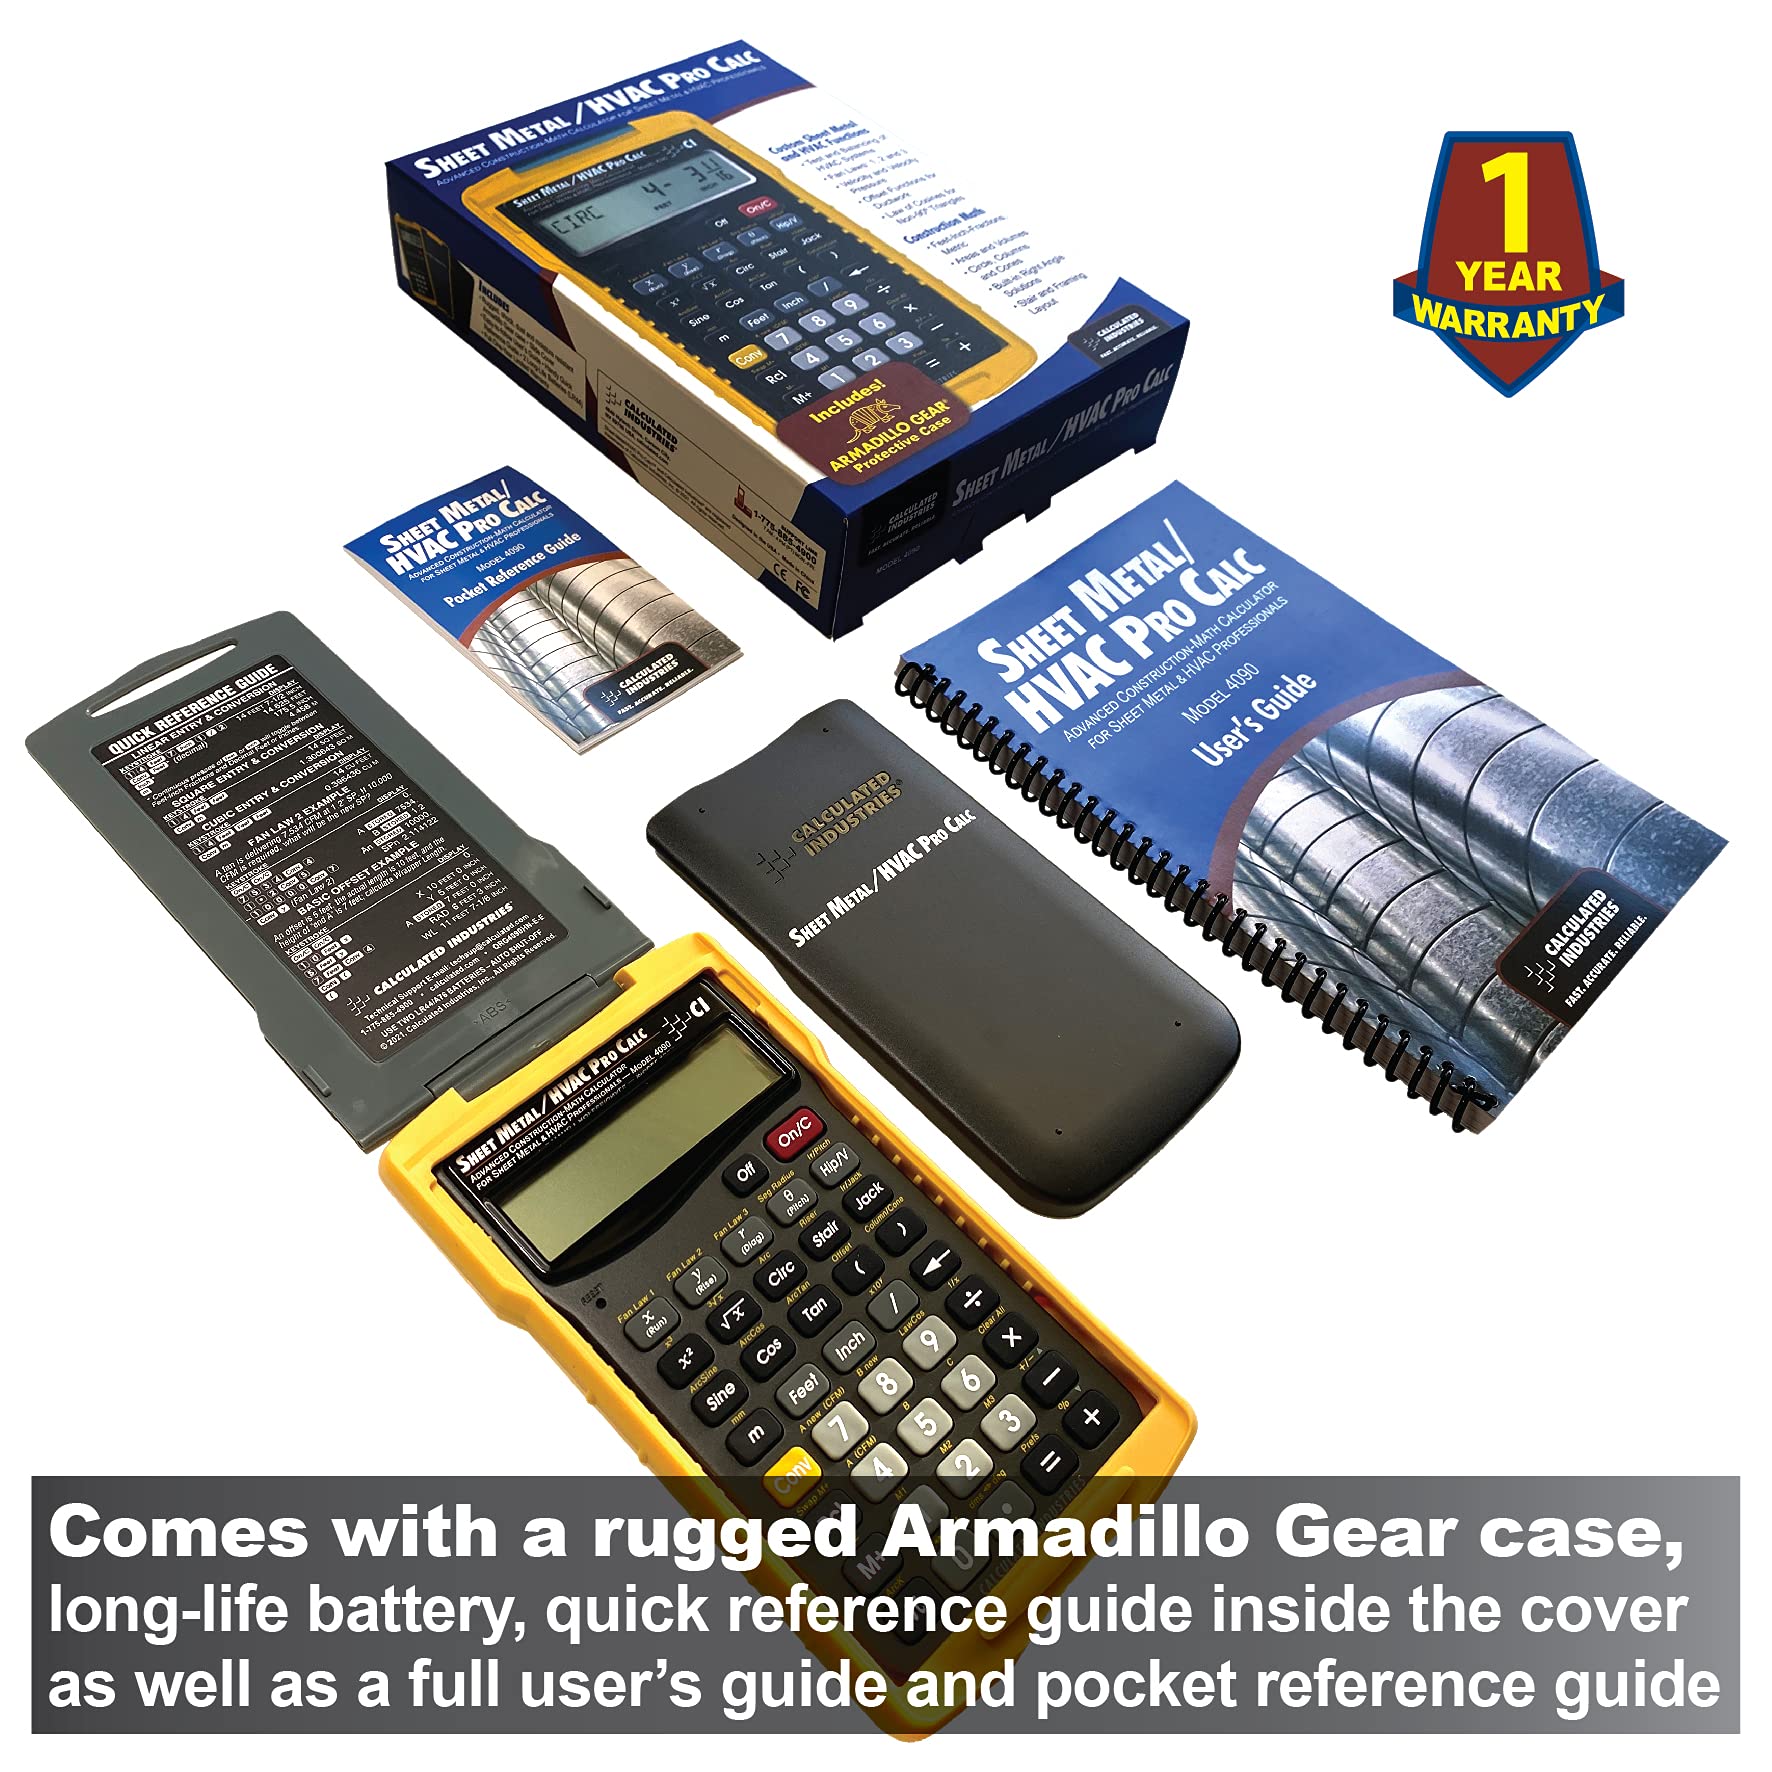 Calculated Industries 4090 Sheet Metal/HVAC Pro Calc Calculator, Advanced Construction-Math for Sheet Metal, HVAC Pros with Fan Law Functions, ArcK Built-in Constant, Laws of Cosines, Offset Functions